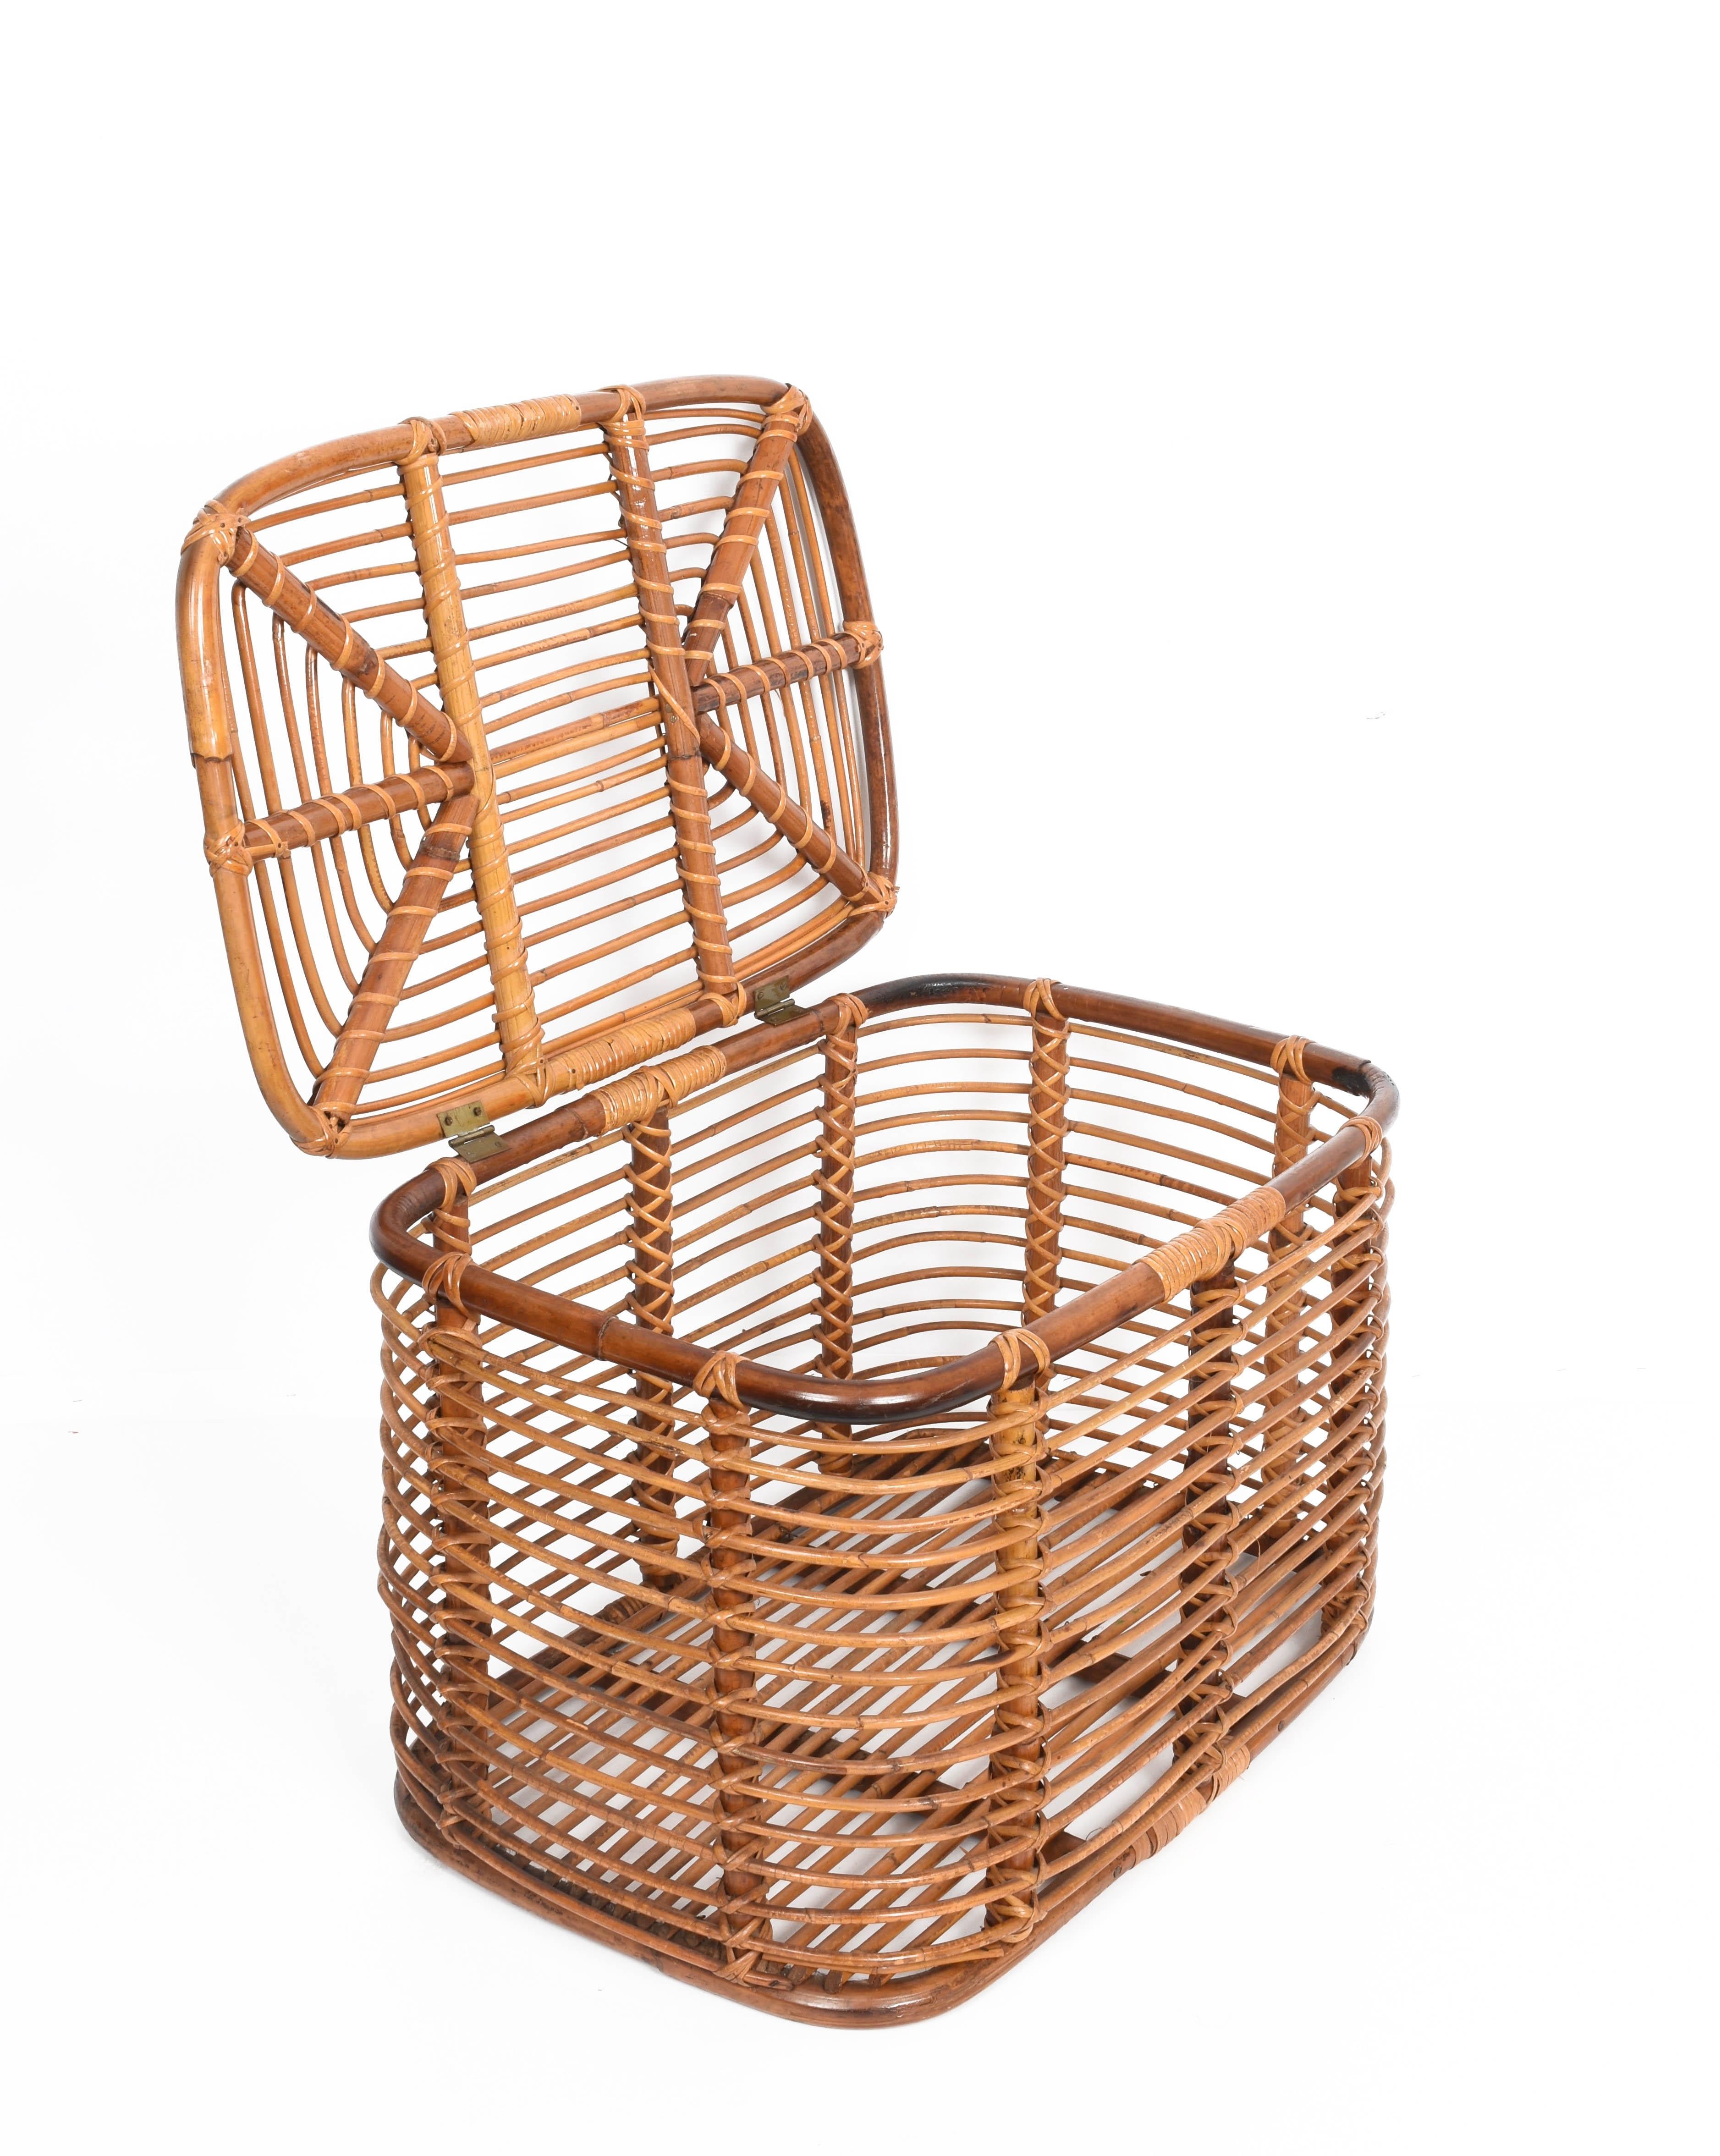 Beautiful midcentury rectangular bamboo and rattan container basket. This item is attributed was produced in Italy during 1960s.

This amazing piece has a round bamboo structure with rattan finishes. The top of this basket is connected to the main